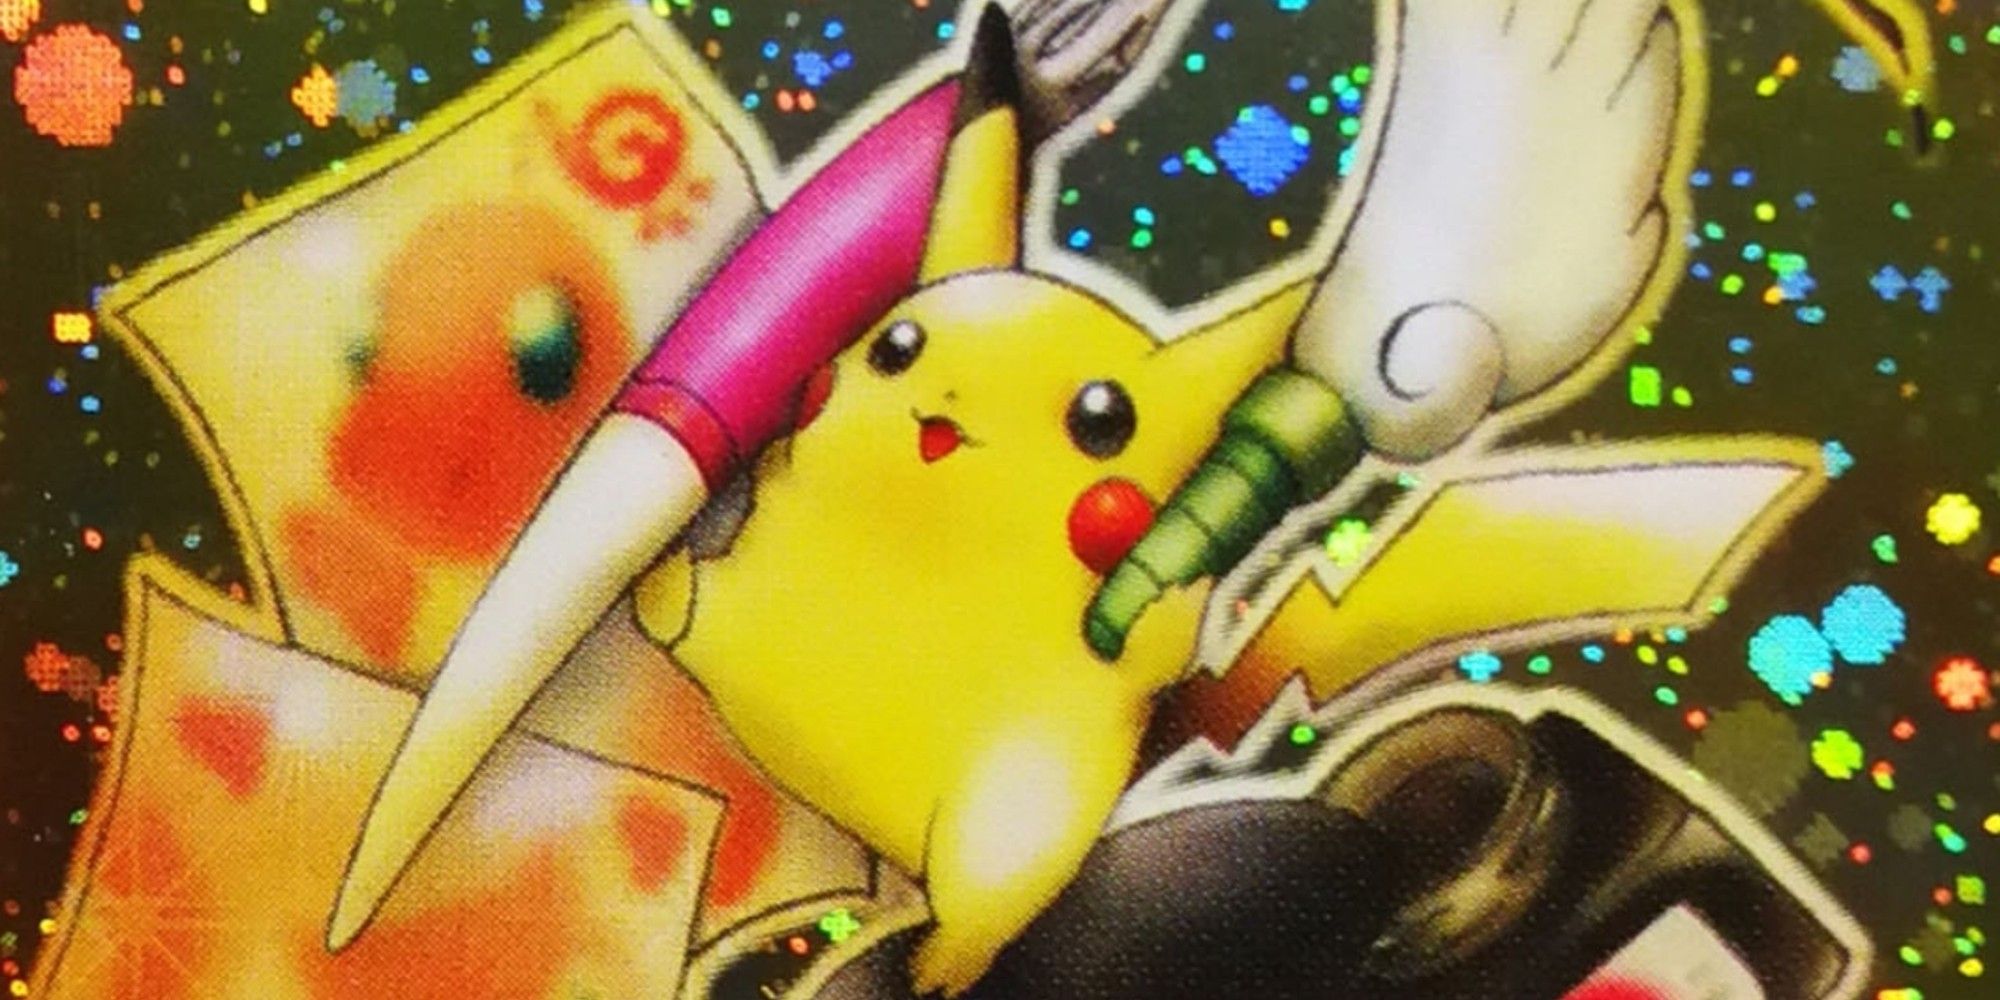 Rare Pokémon Pikachu sells for more than $200,000 at auction - Polygon